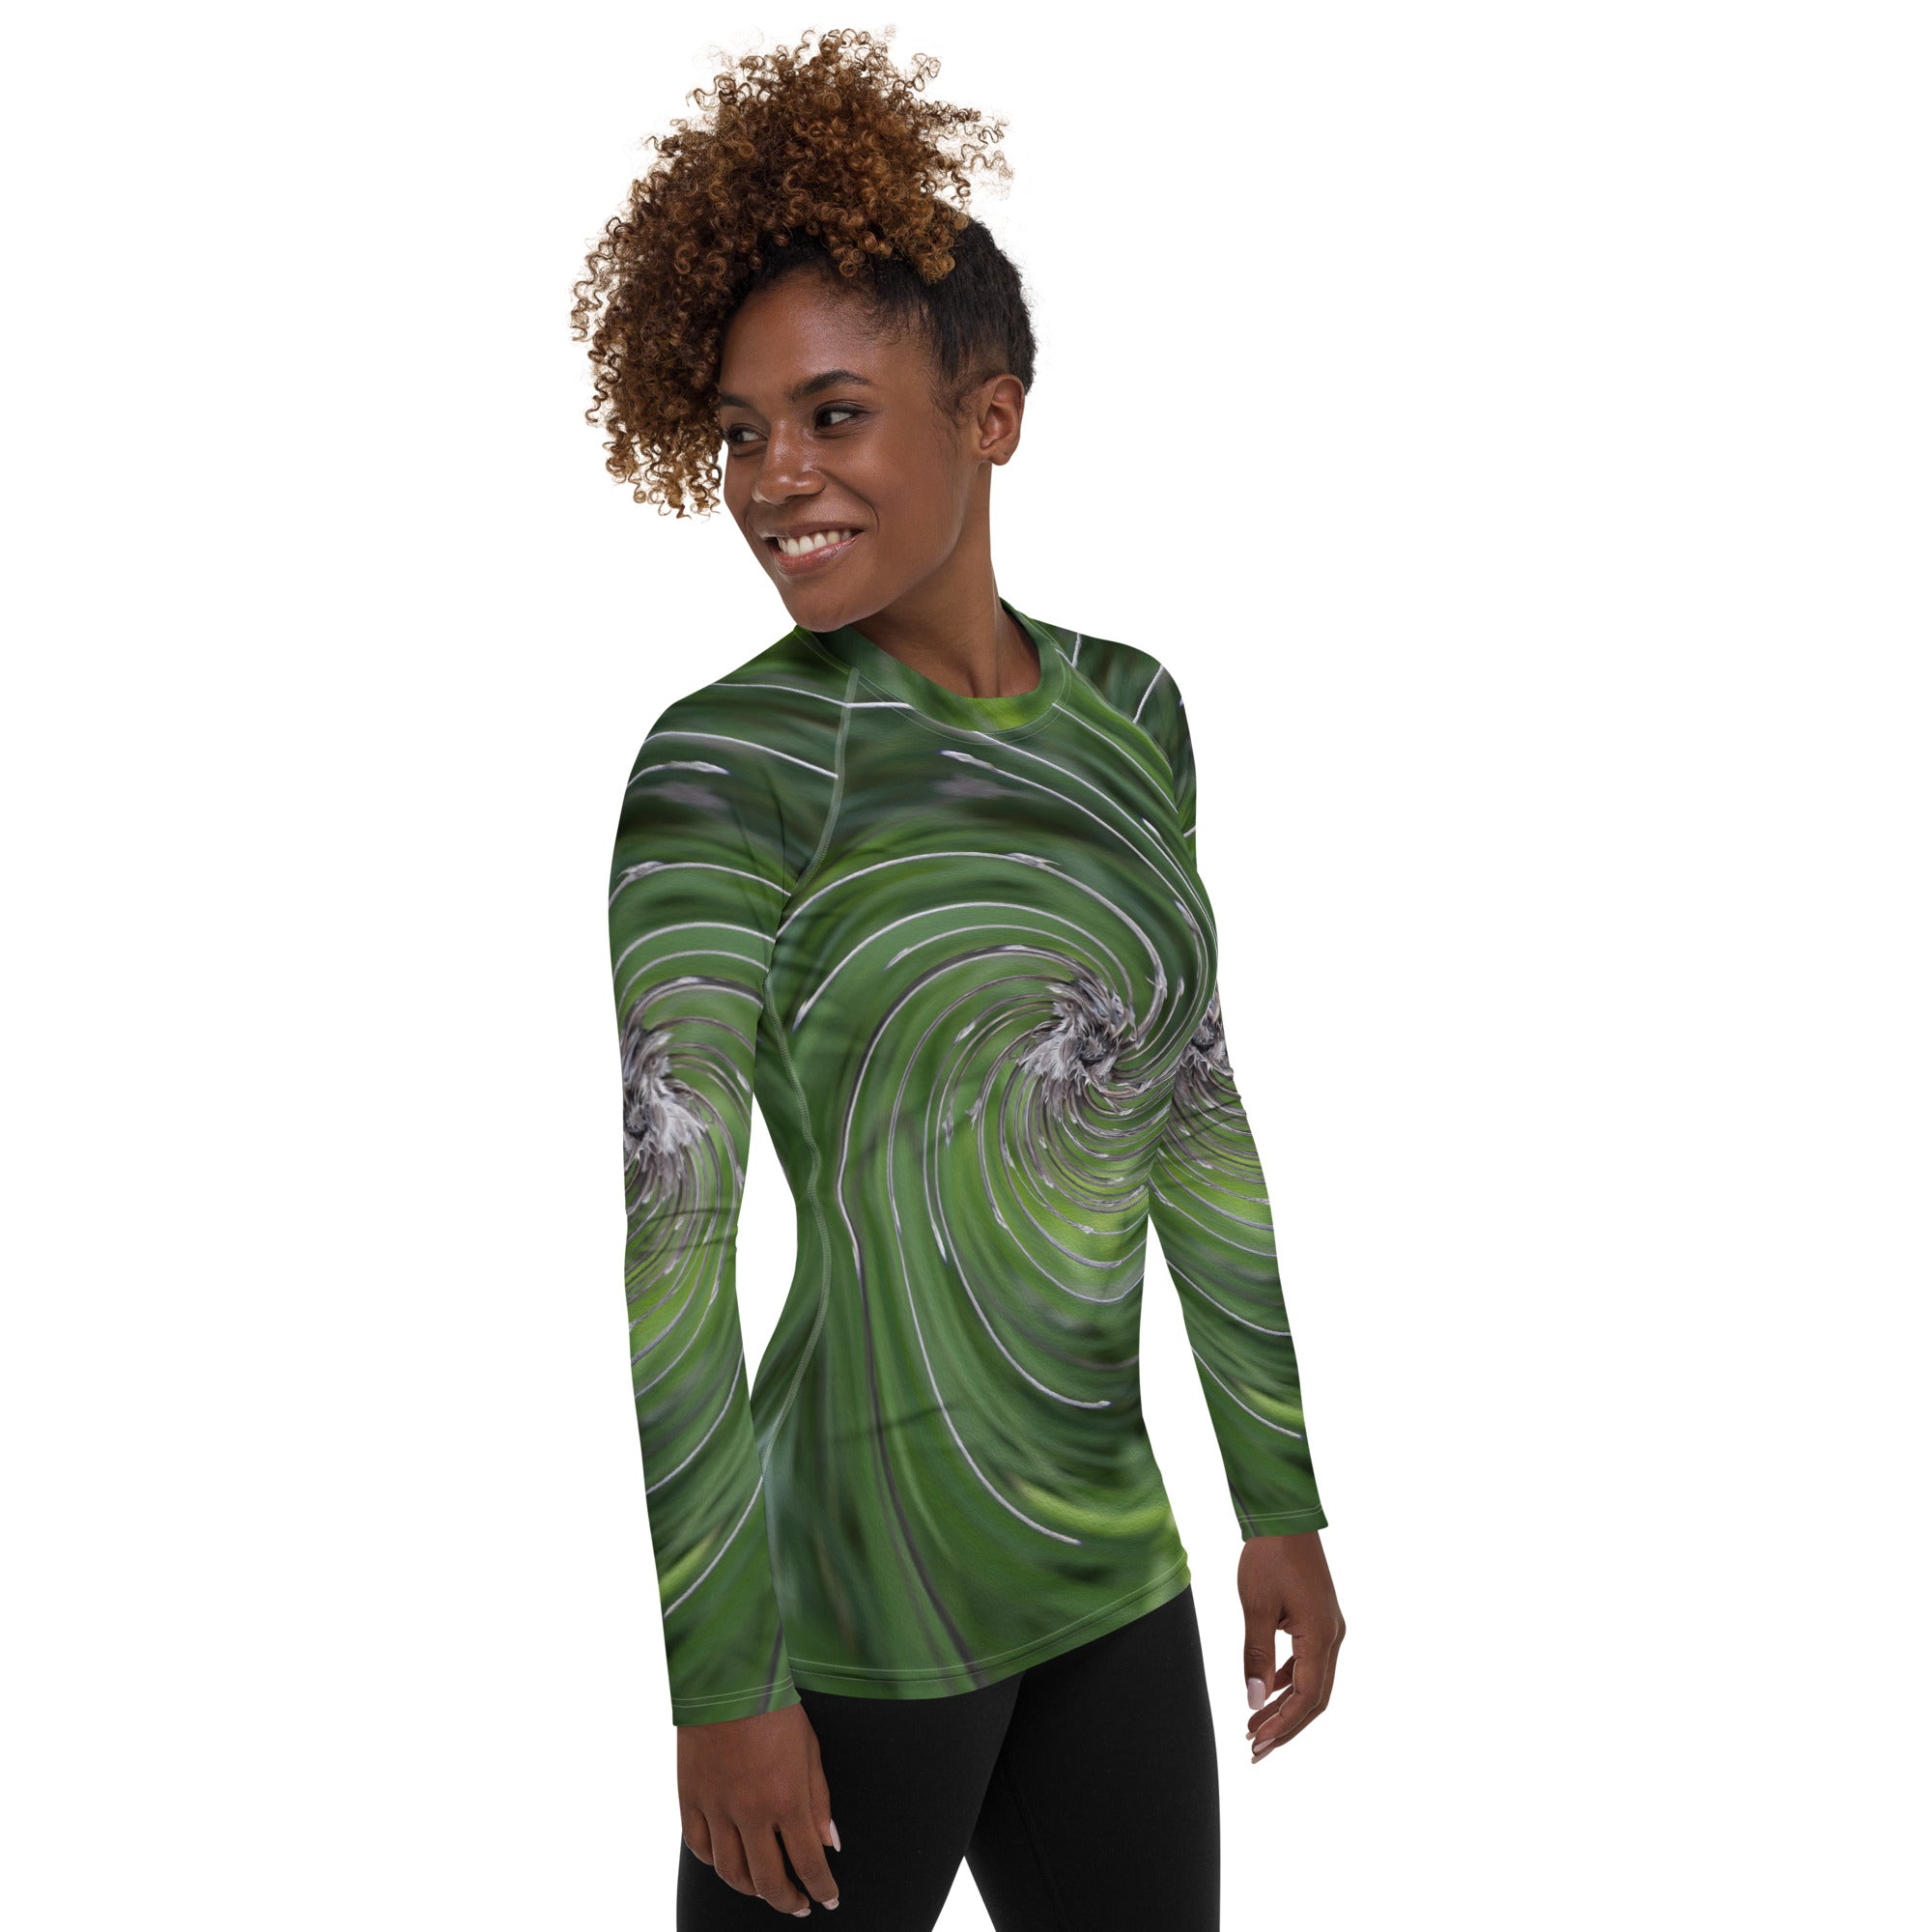 Women's Rash Guard Shirts, Cool Abstract Retro Chartreuse Green Floral Swirl